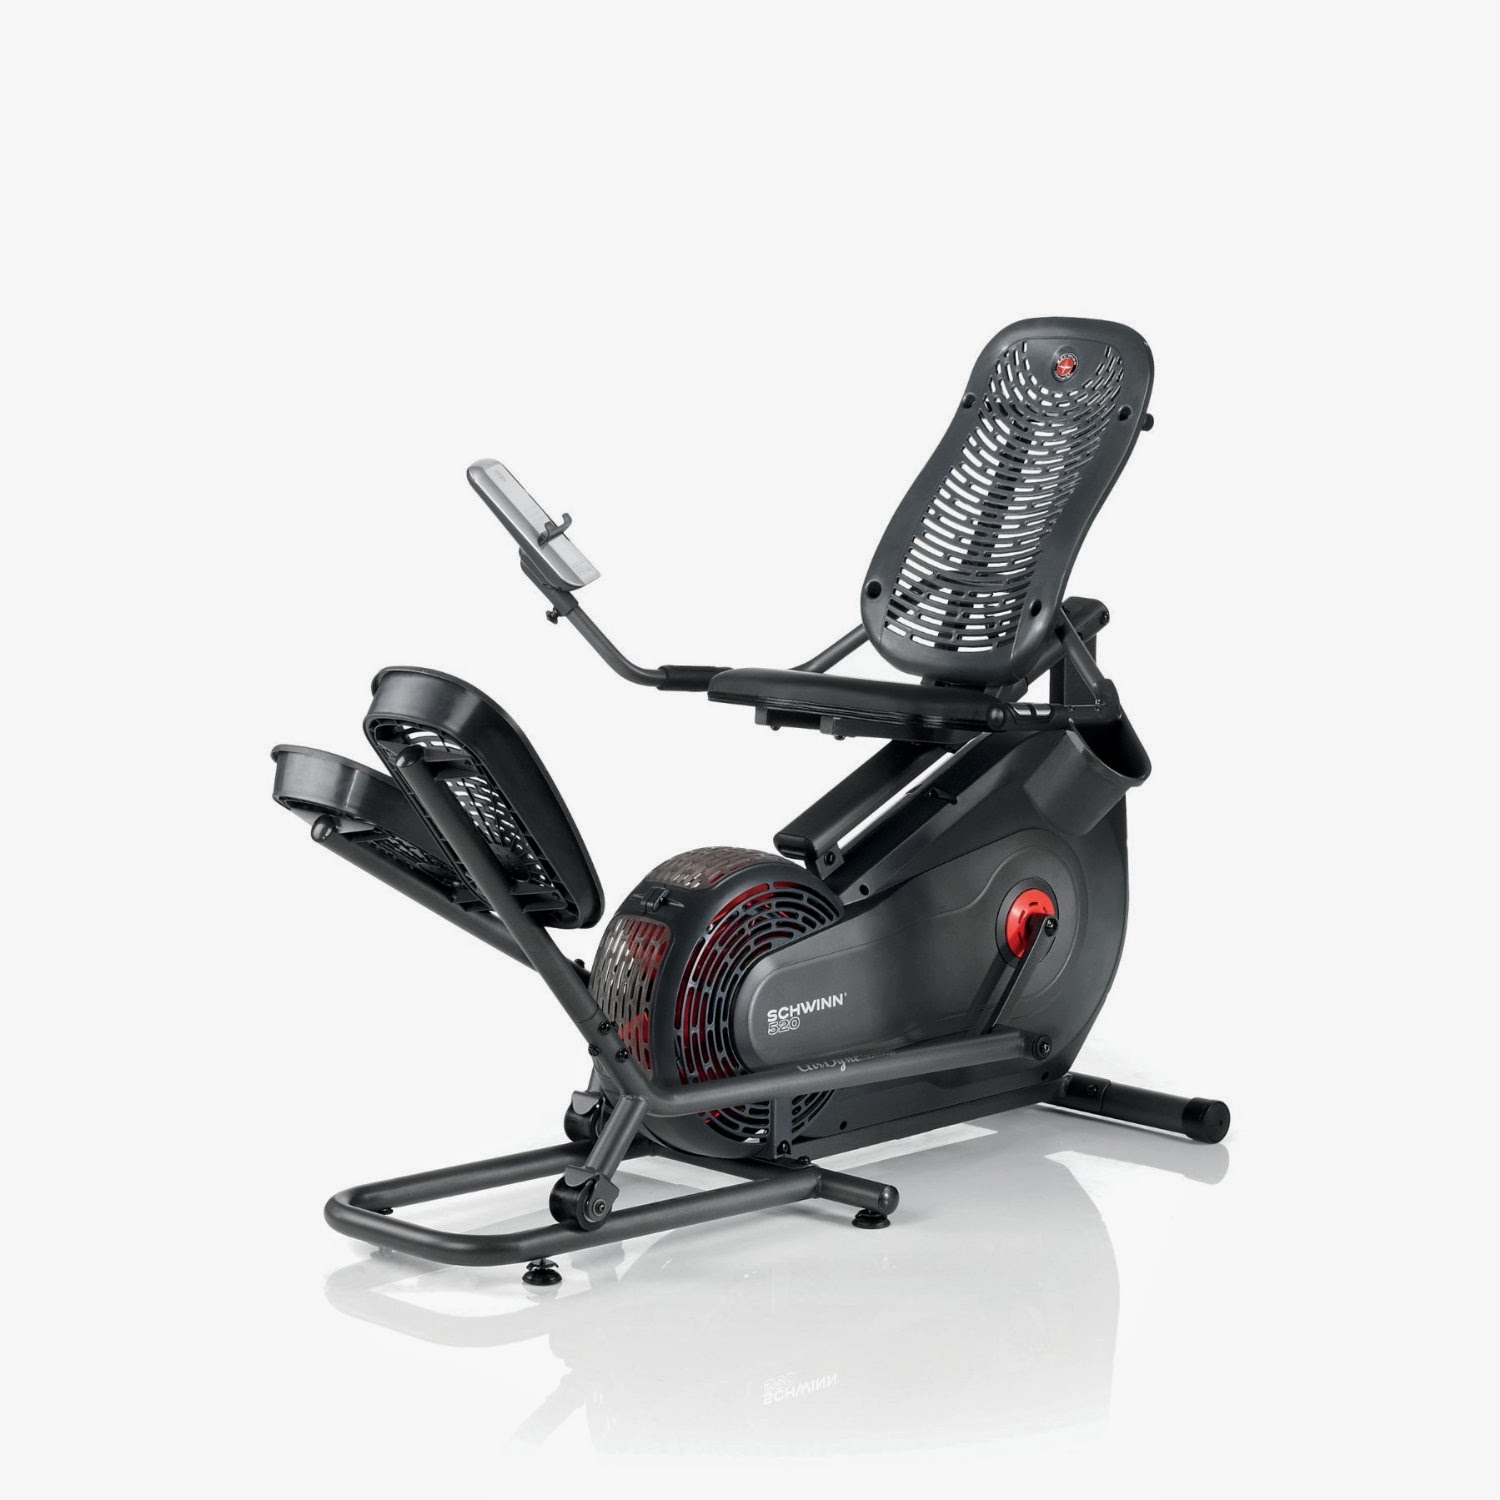 Schwinn 520 Recumbent Elliptical Trainer, review of features, ergonomic comfy back support seat, striding motion of elliptical gives an effective workout